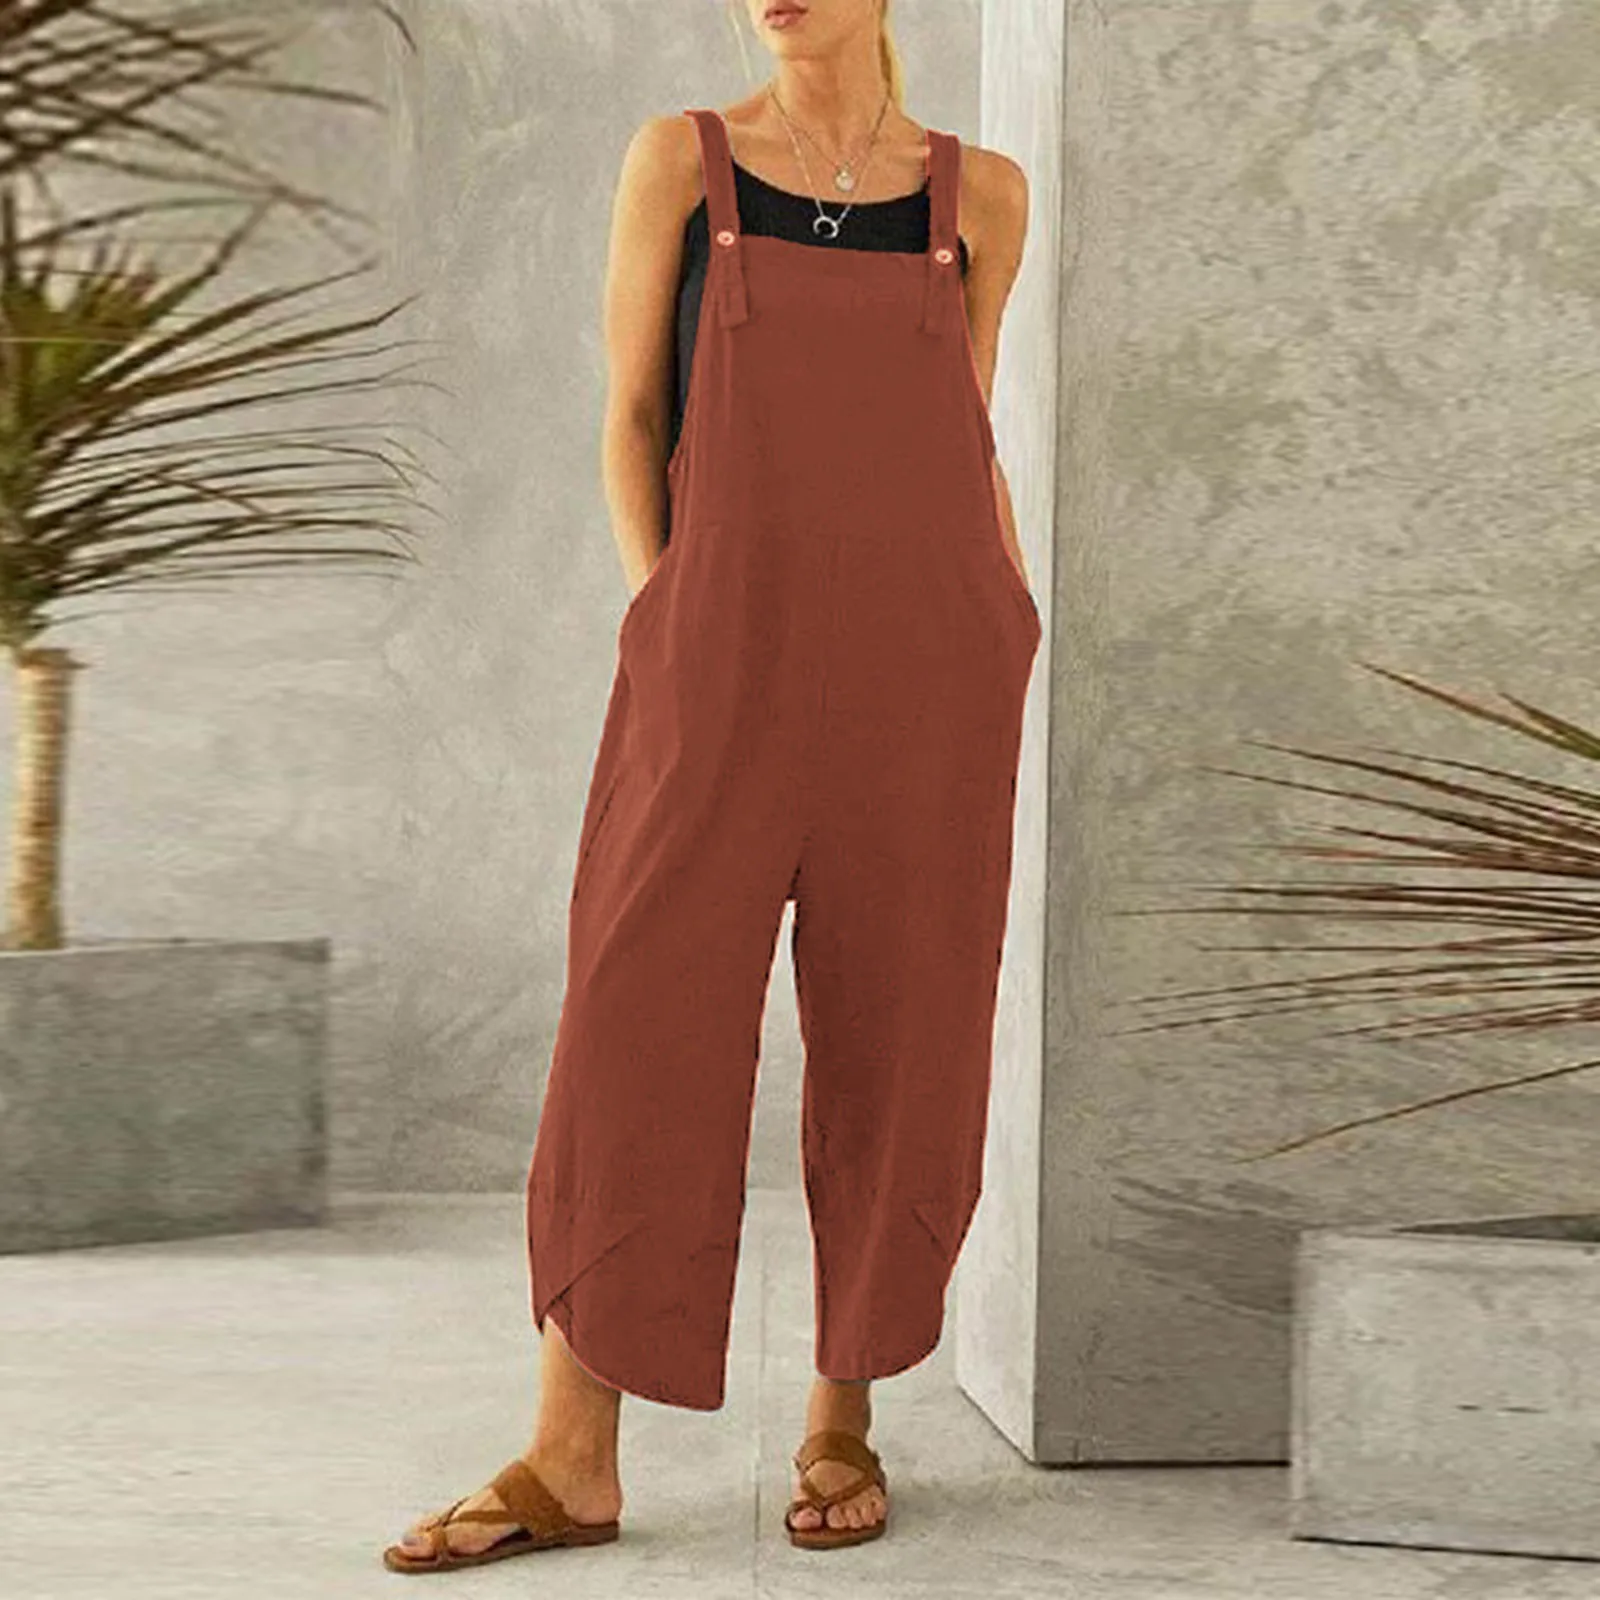 

Womens Sleeveless Dungarees Rompers Cotton Linen Jumpsuit Loose Preppy Style Pants Casual Pocket Overalls Playsuits 4XL